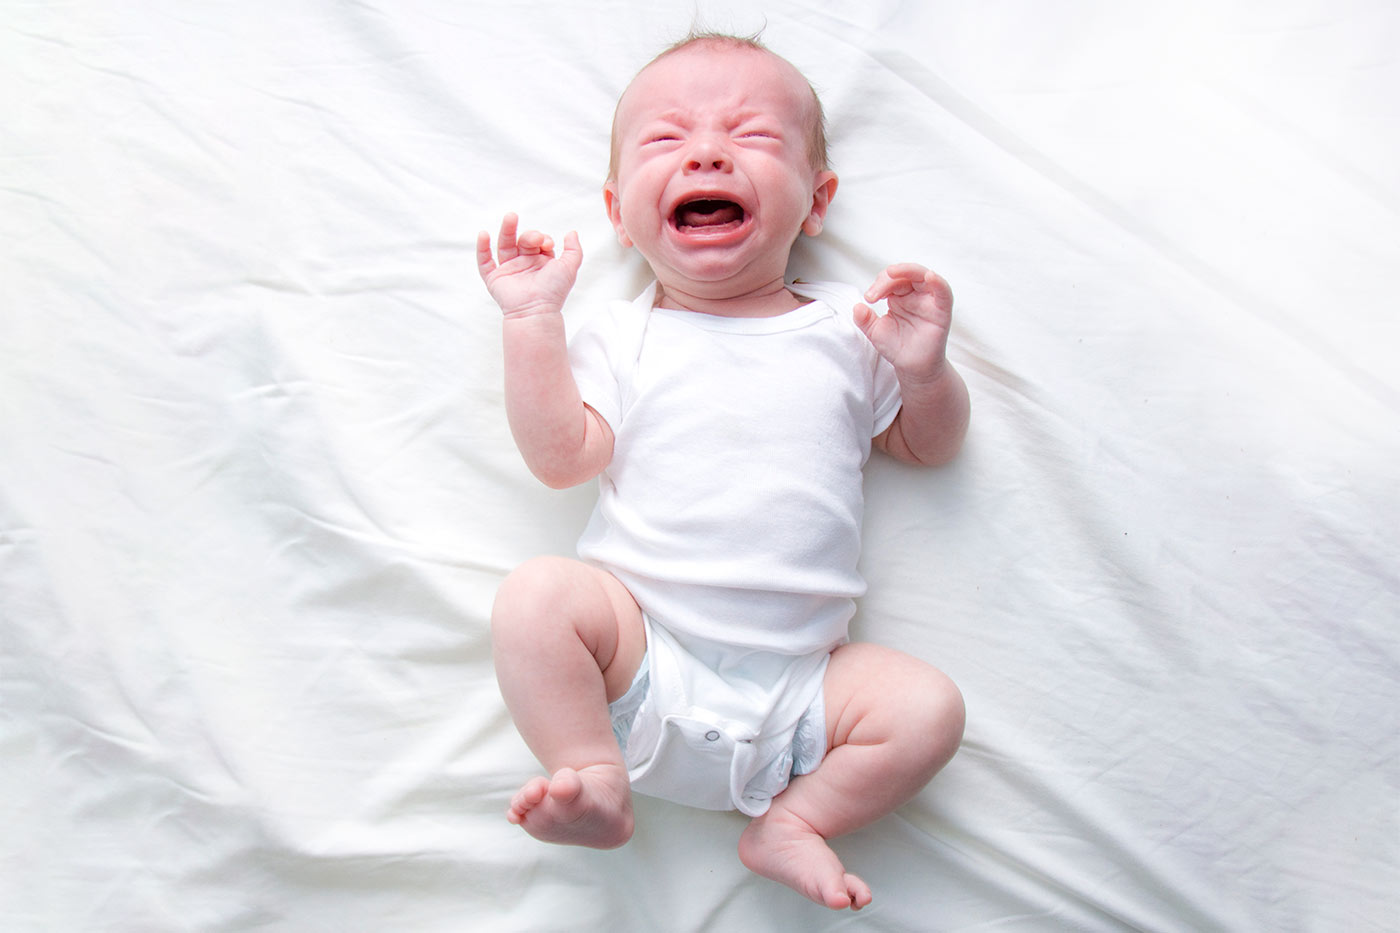 Top 5 Reasons Your Newborn Wakes Up Screaming - Sleeping Should Be Easy